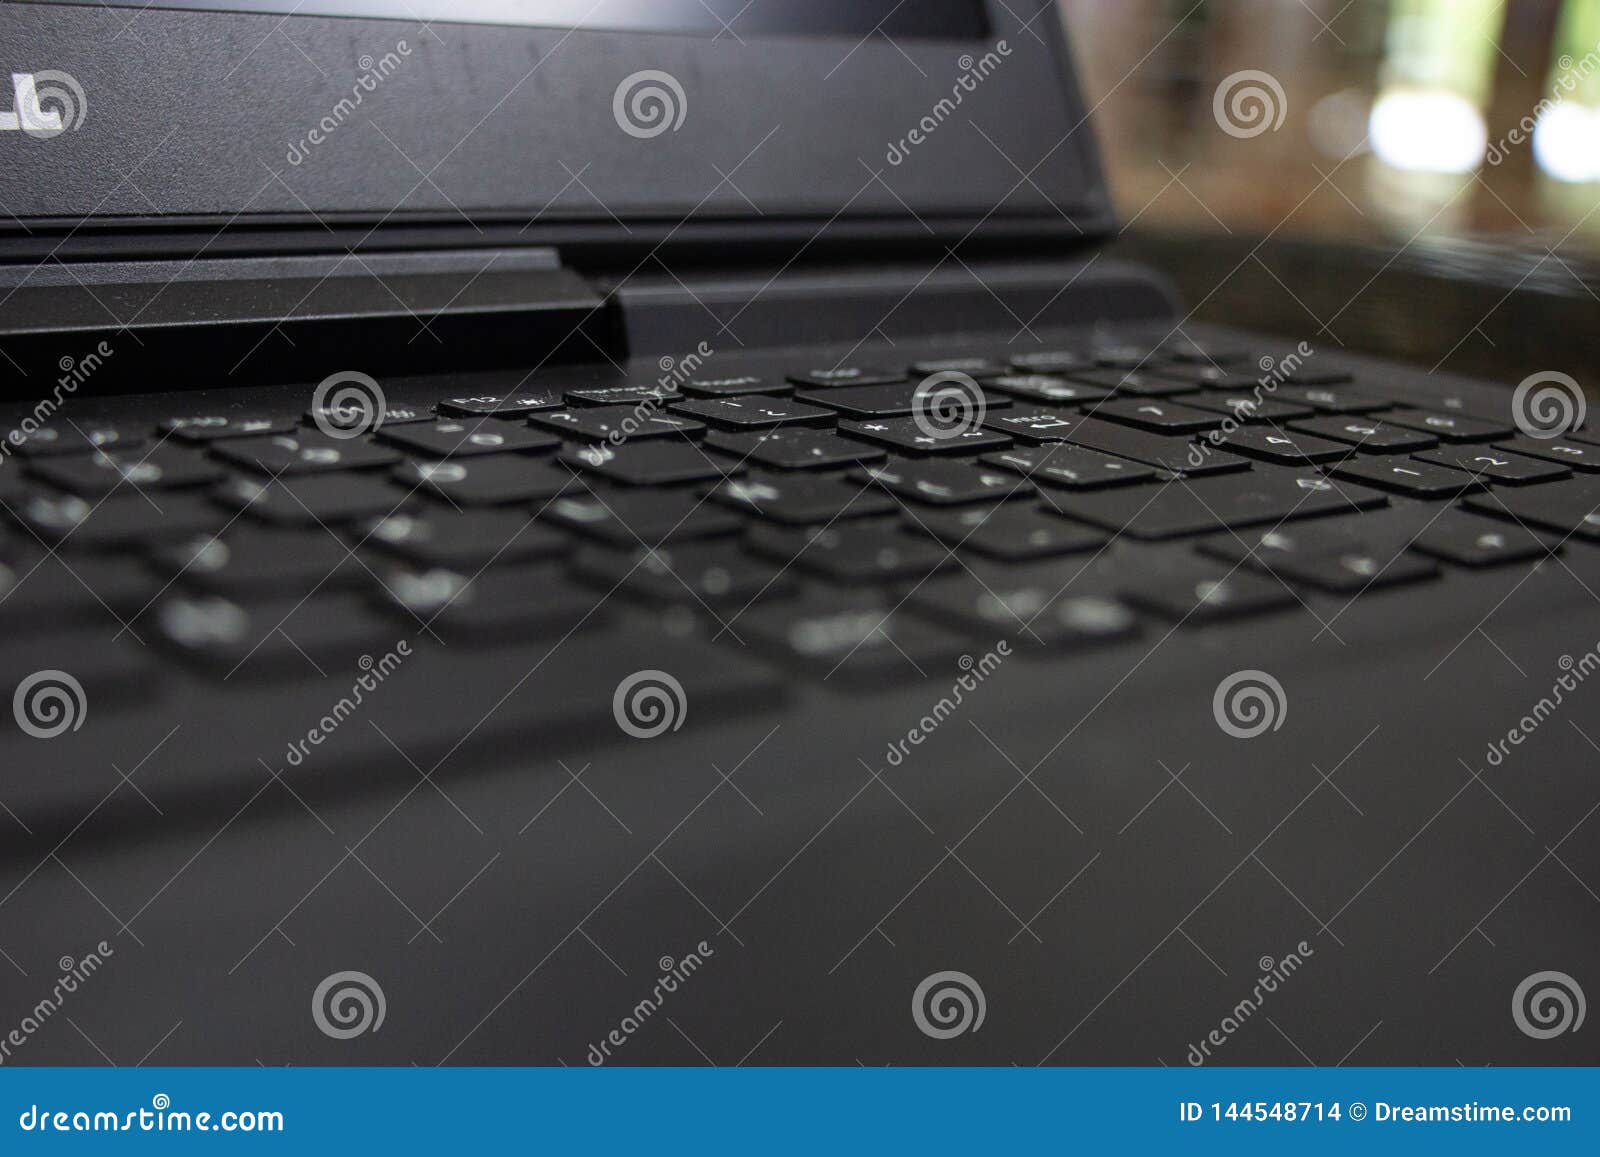 keyboard and laptop